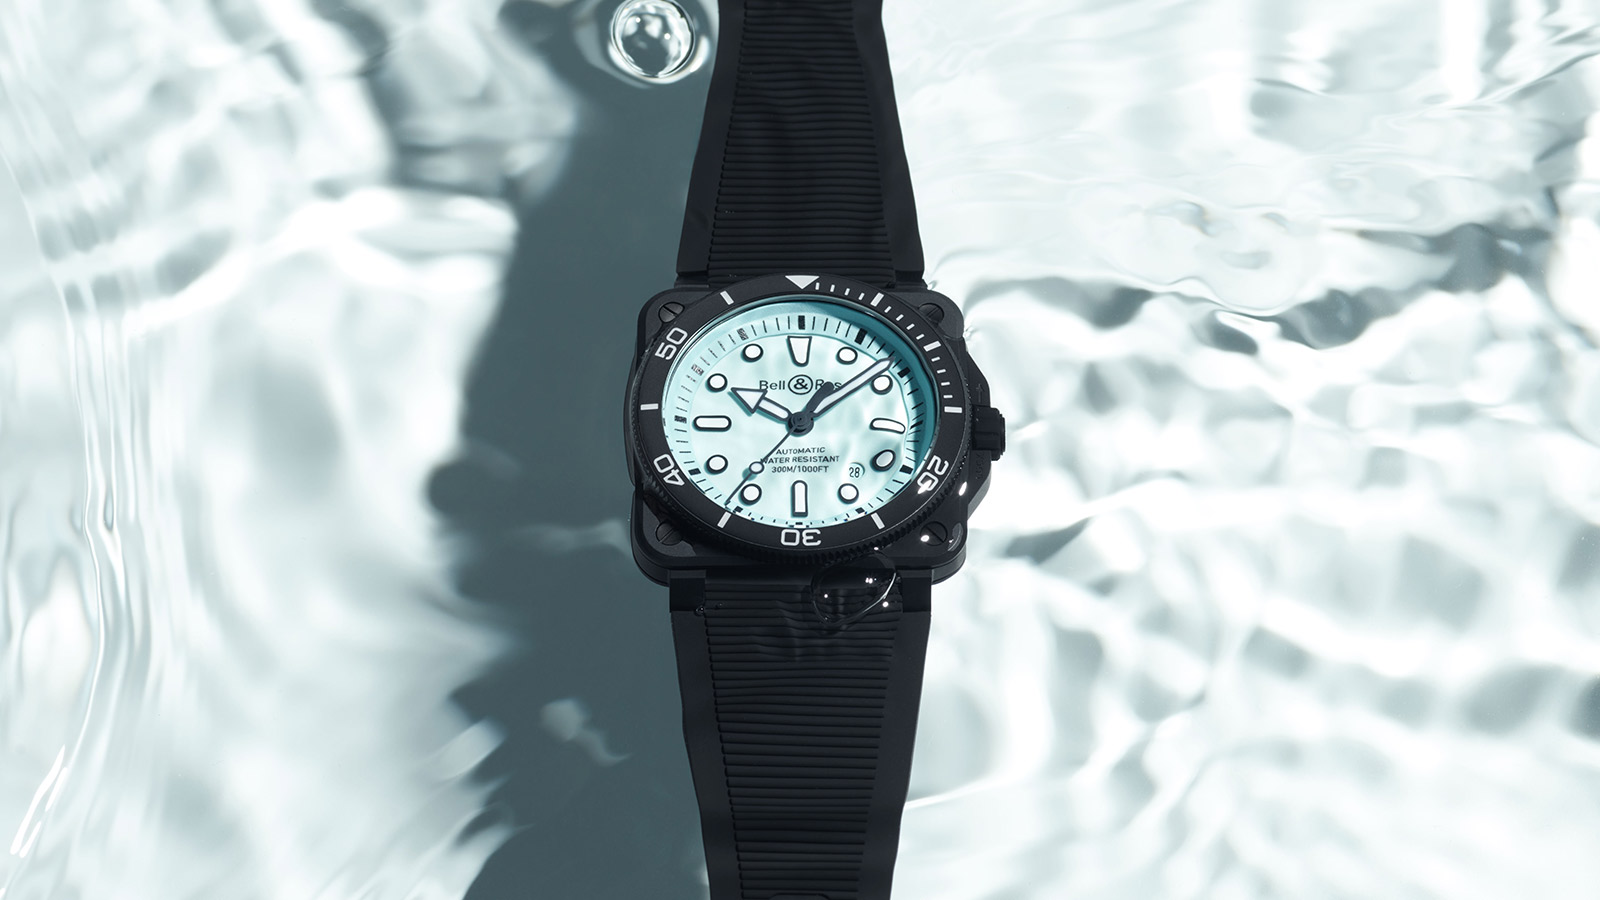 Bell & Ross BR 03 Diver series